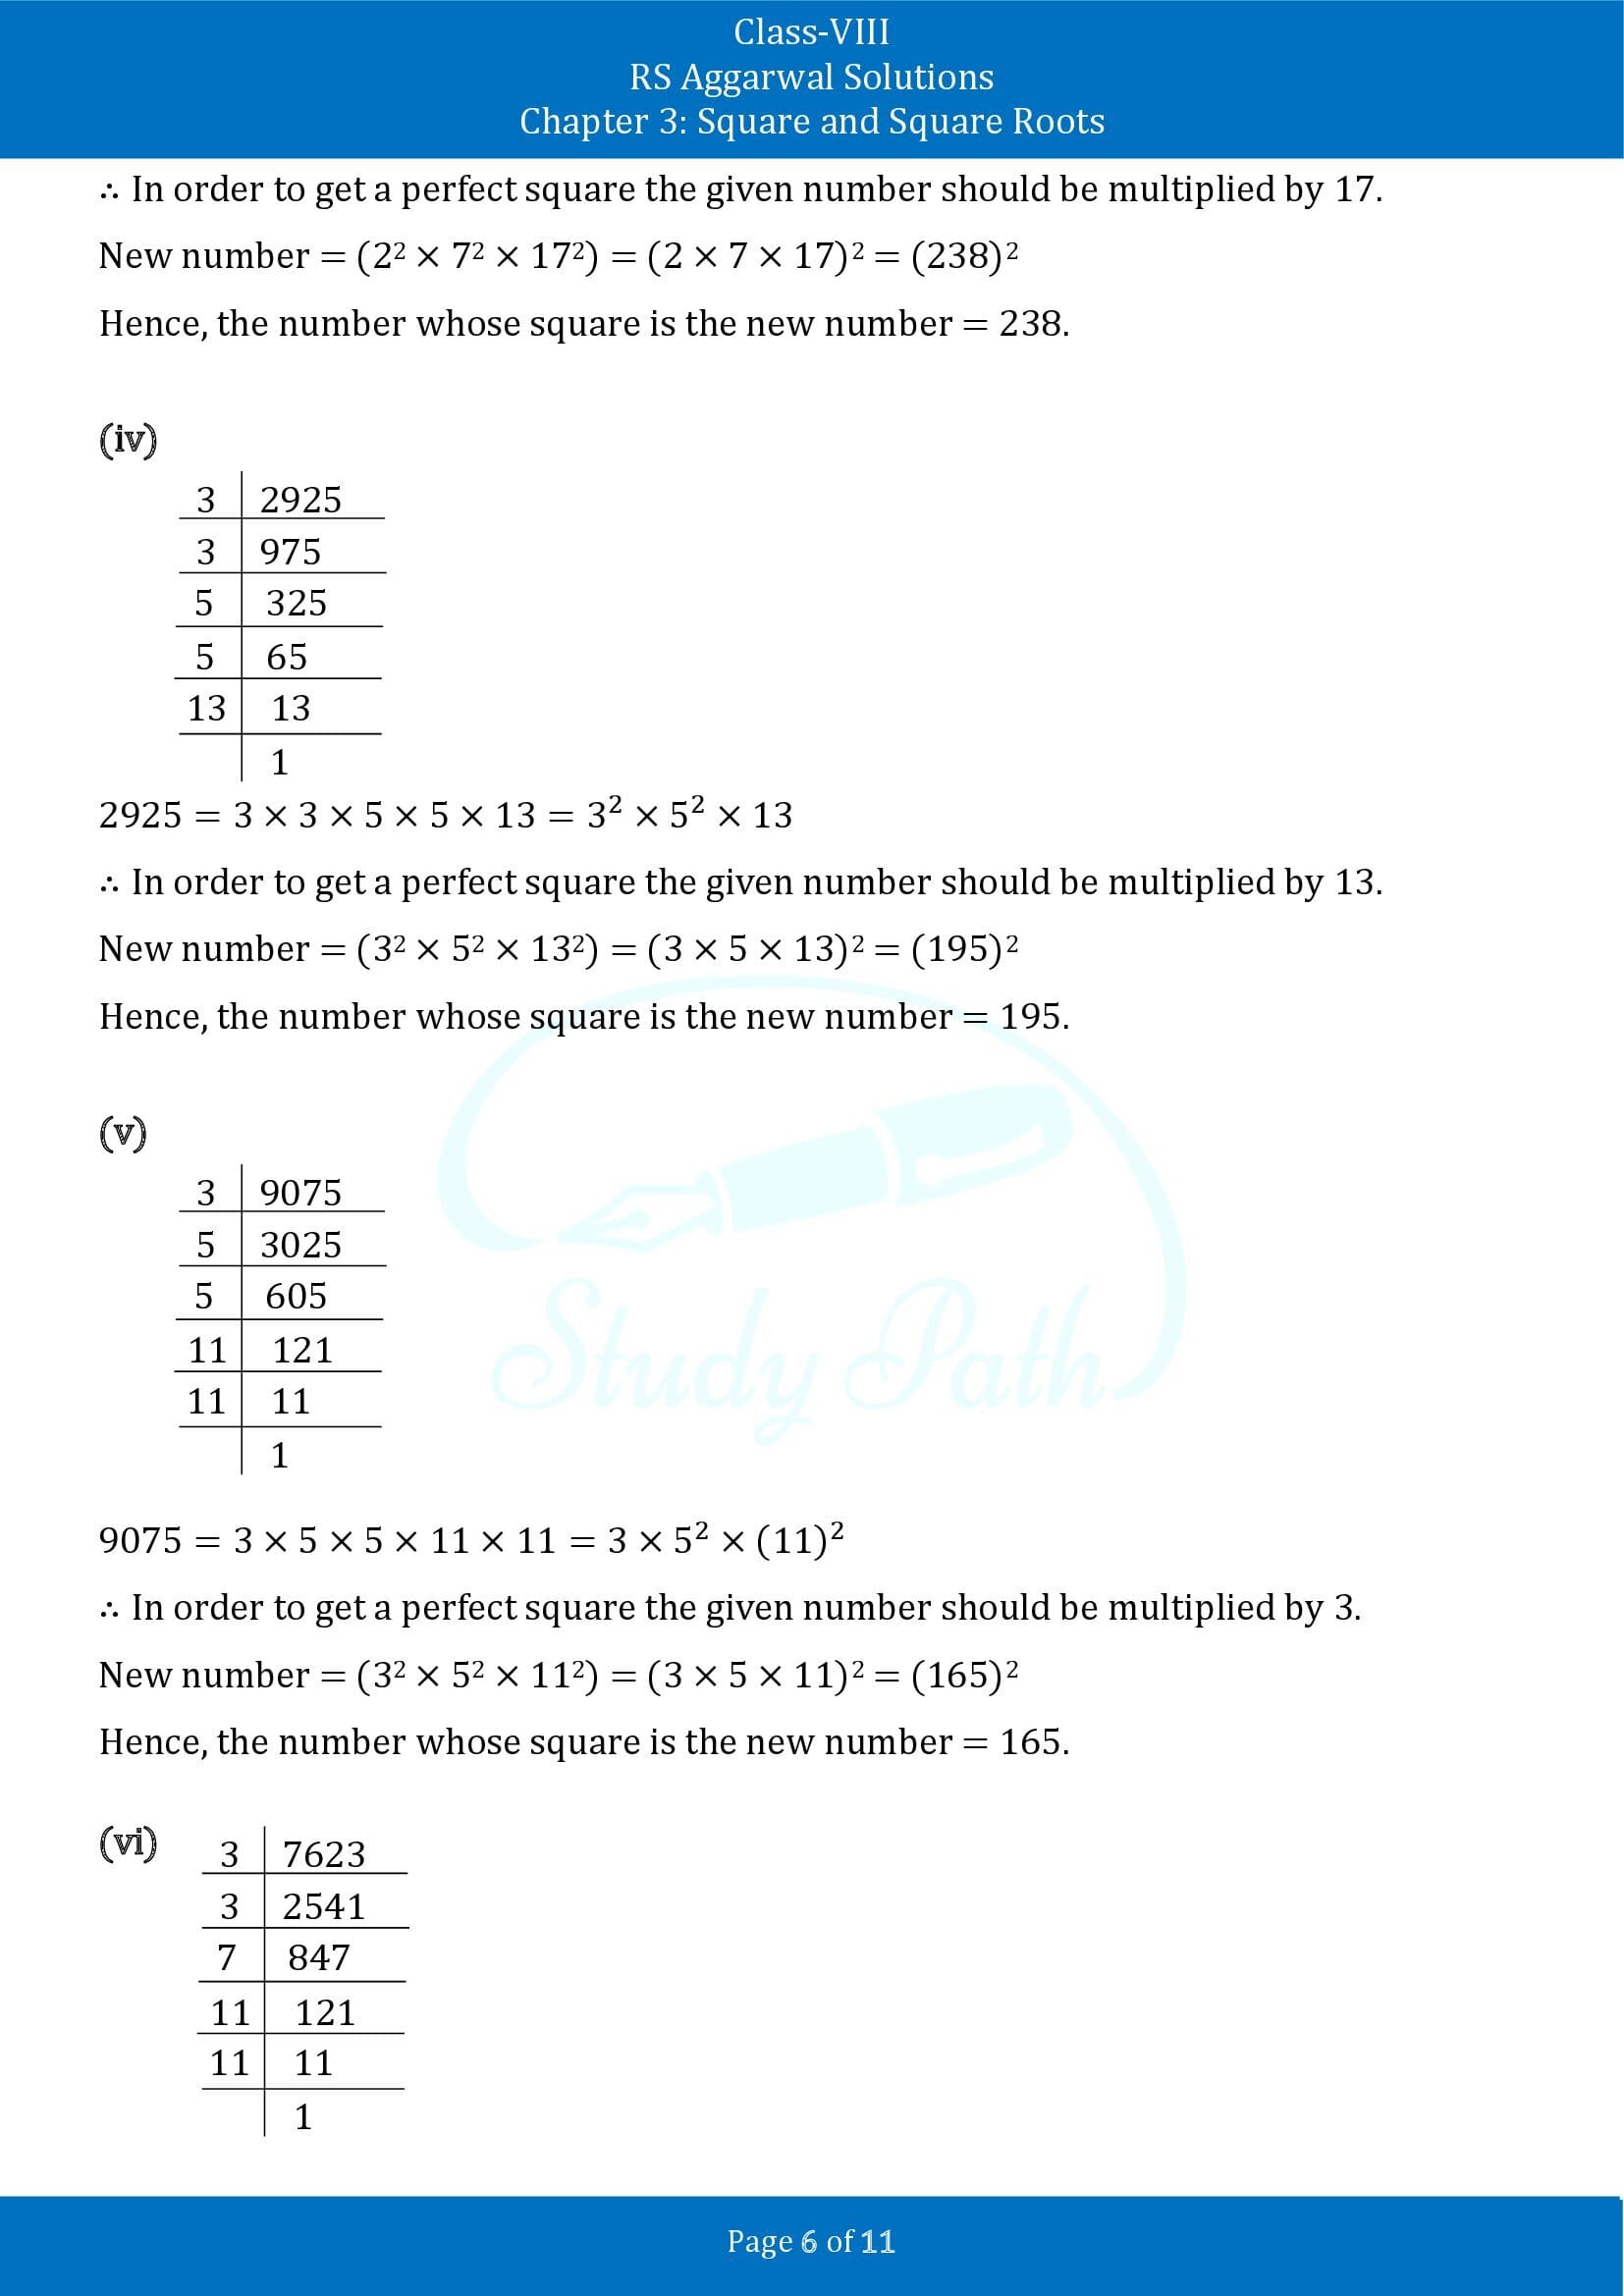 RS Aggarwal Solutions Class 8 Chapter 3 Square and Square Roots Exercise 3A 00006